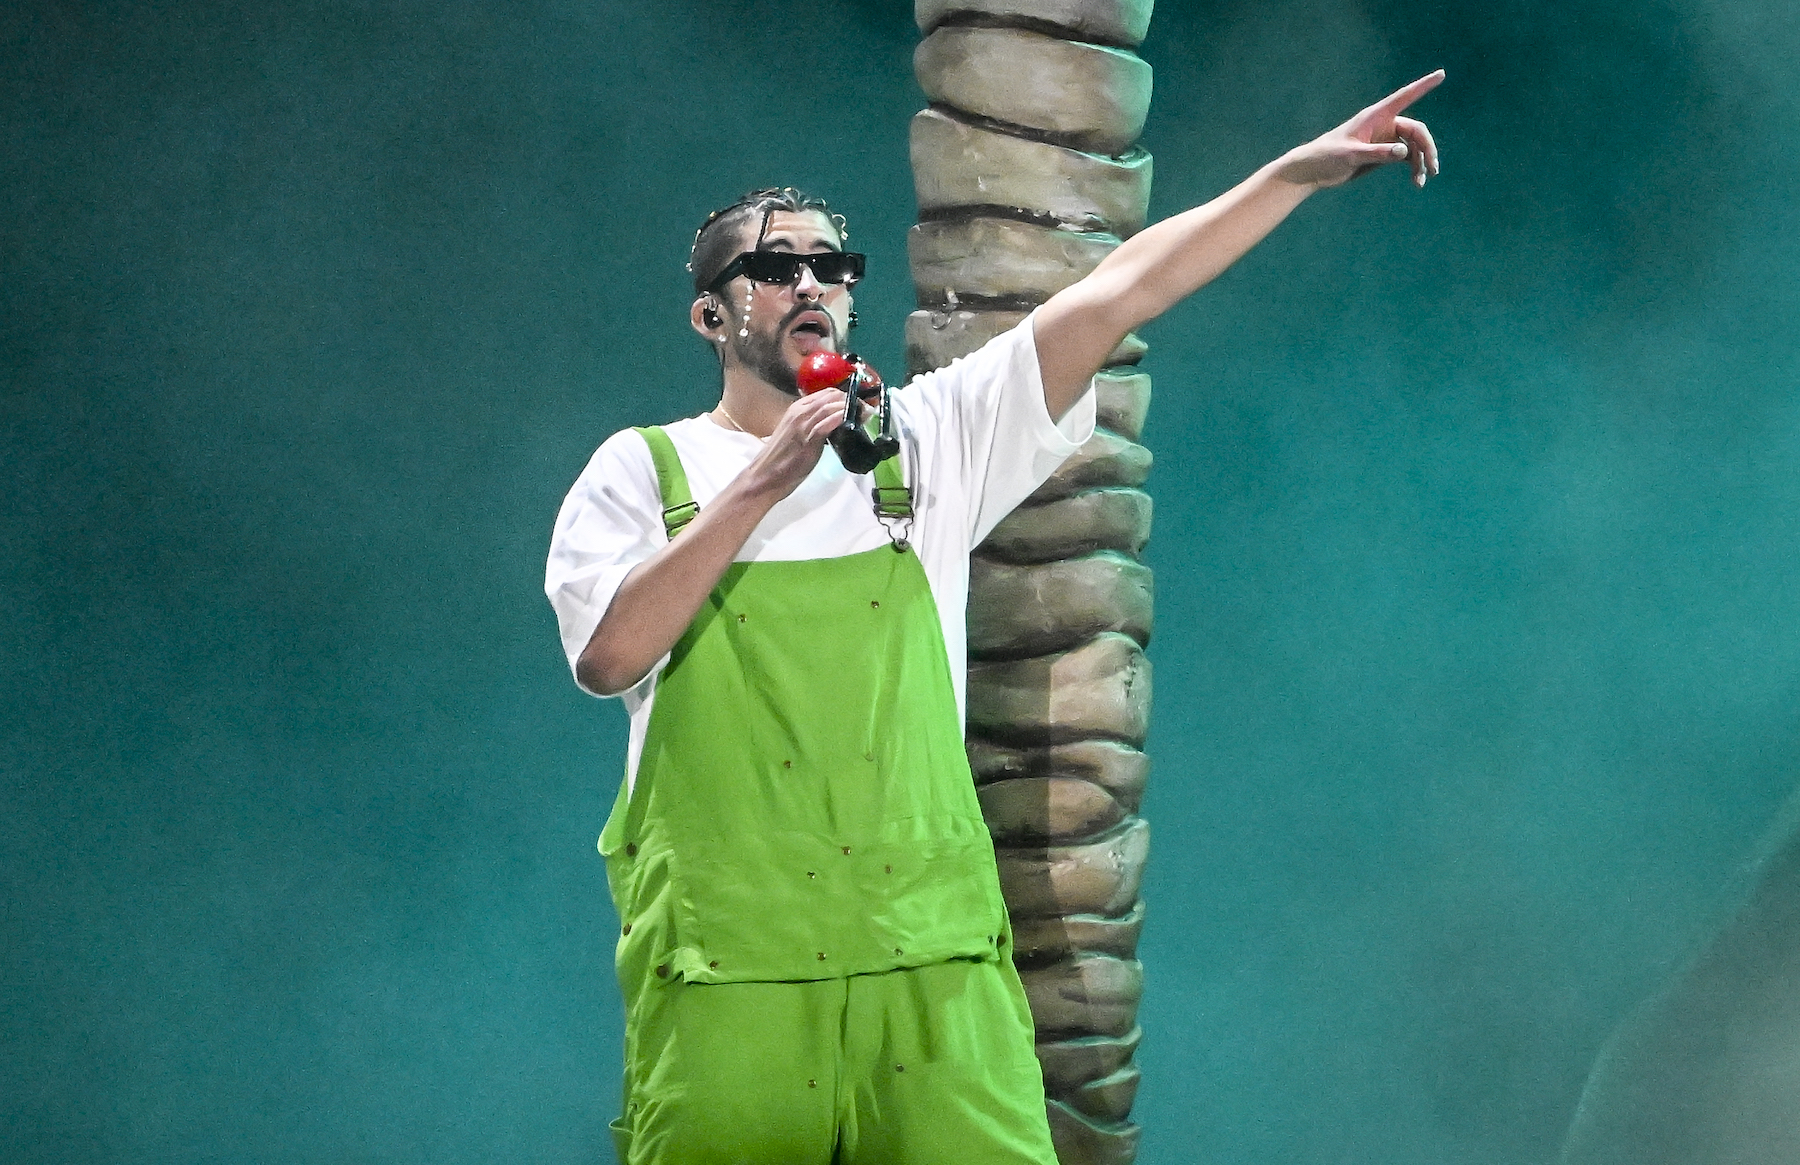 Bad Bunny, who is nominated for 8 AMAs, performing wearing green